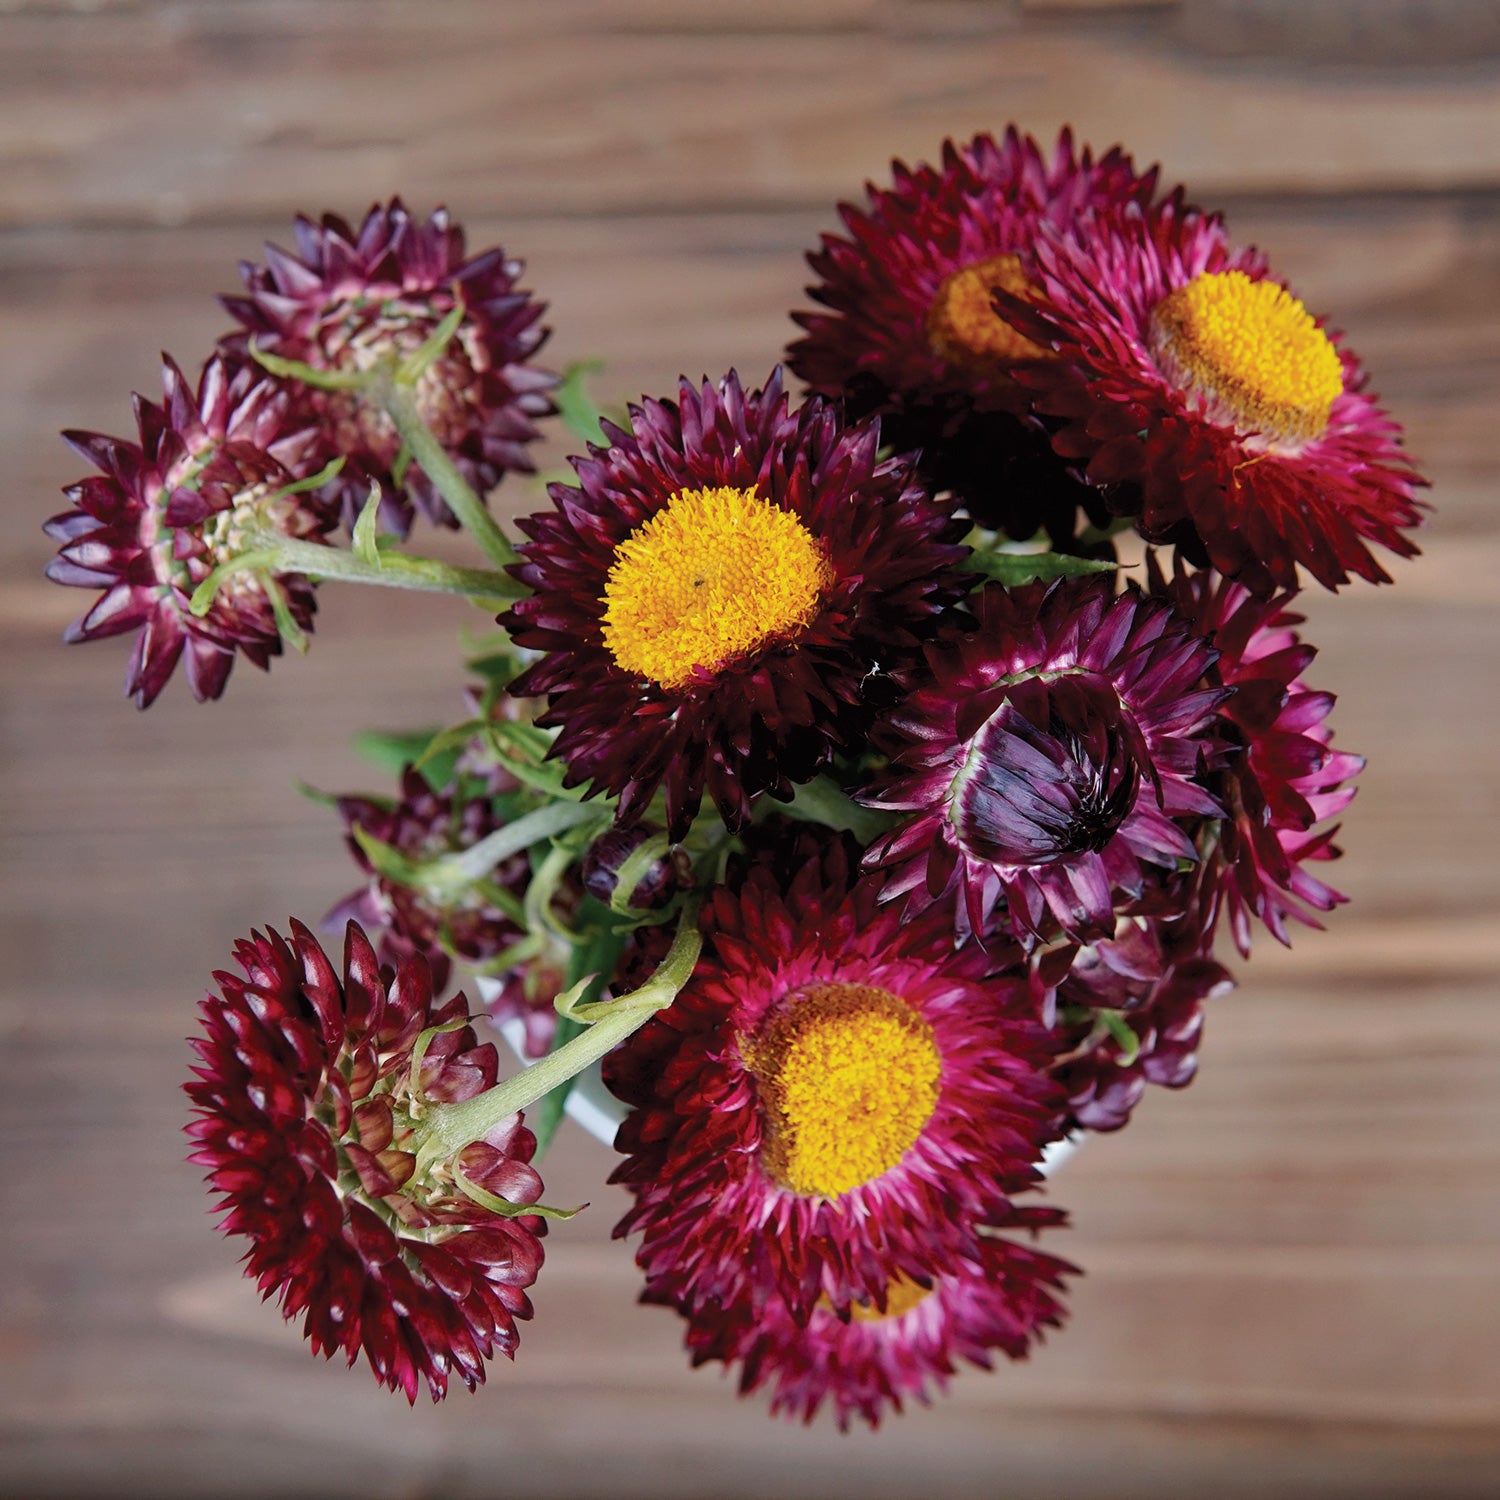 How to Grow Strawflowers: 5 Tips for Growing Strawflowers